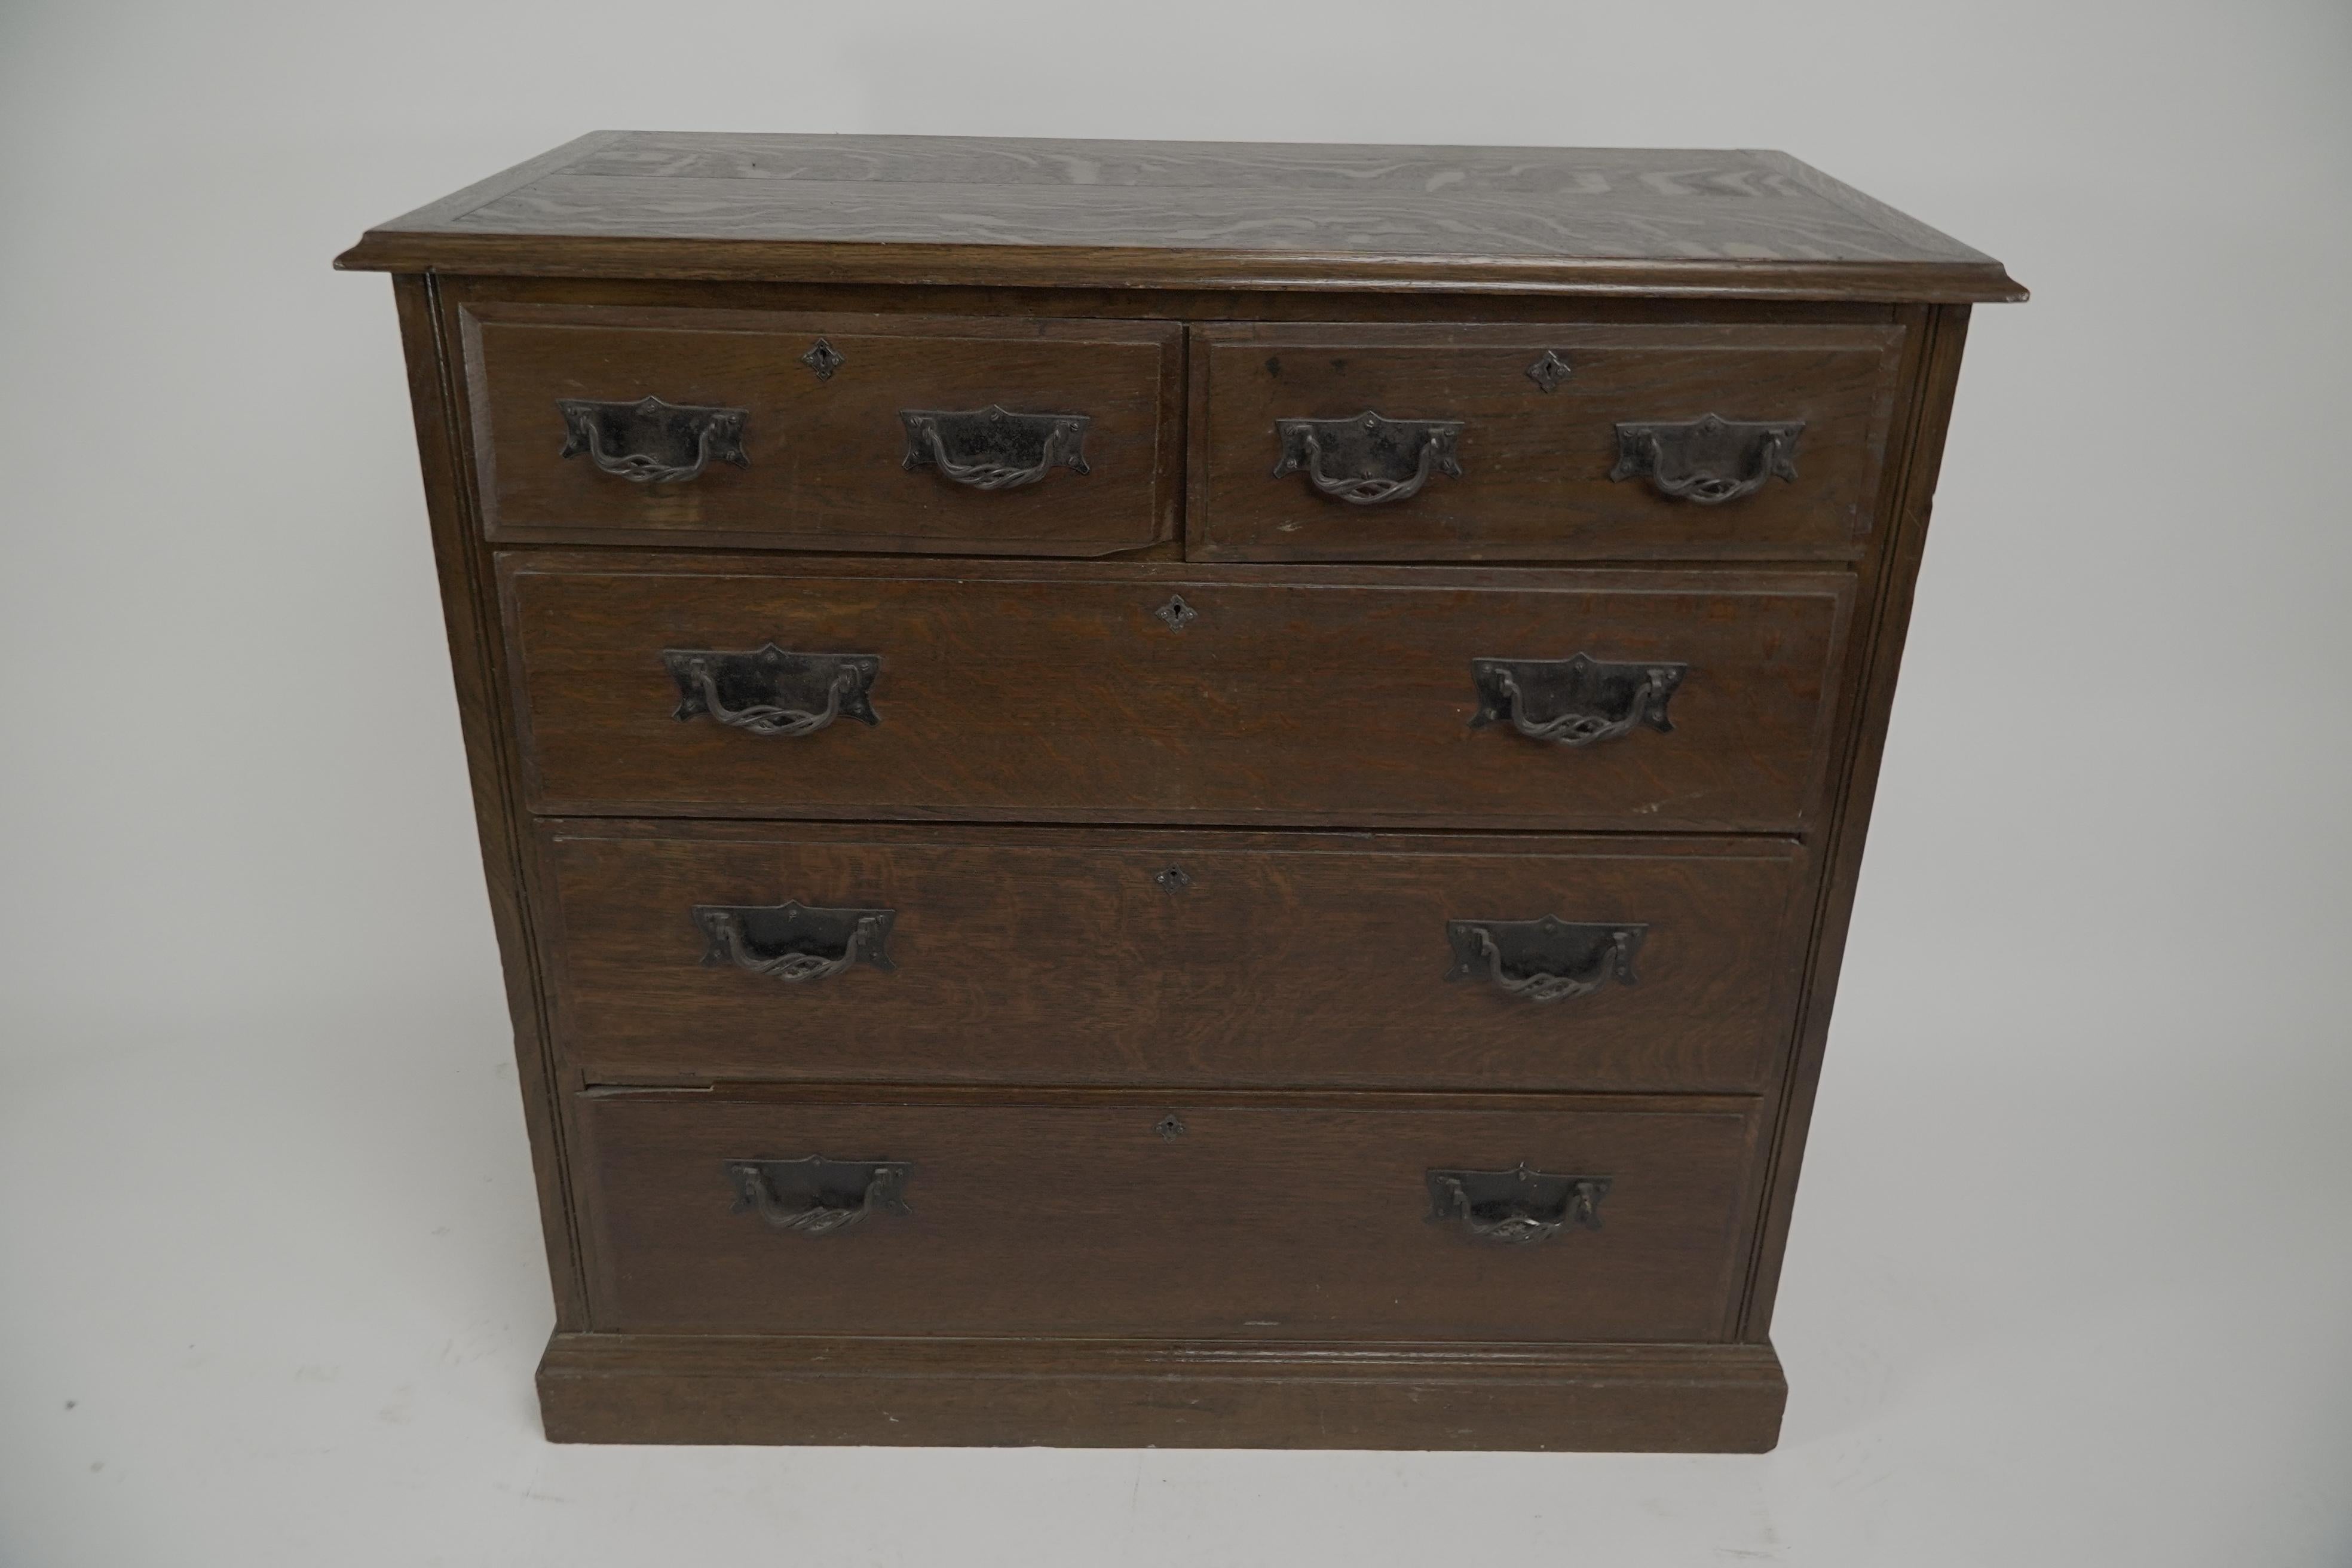 Arthur Simpson of Kendal. An Arts and Crafts oak chest of drawers with hand-formed writhen iron handles and made from beautiful hand chosen quarter sawn wild grain oak.
